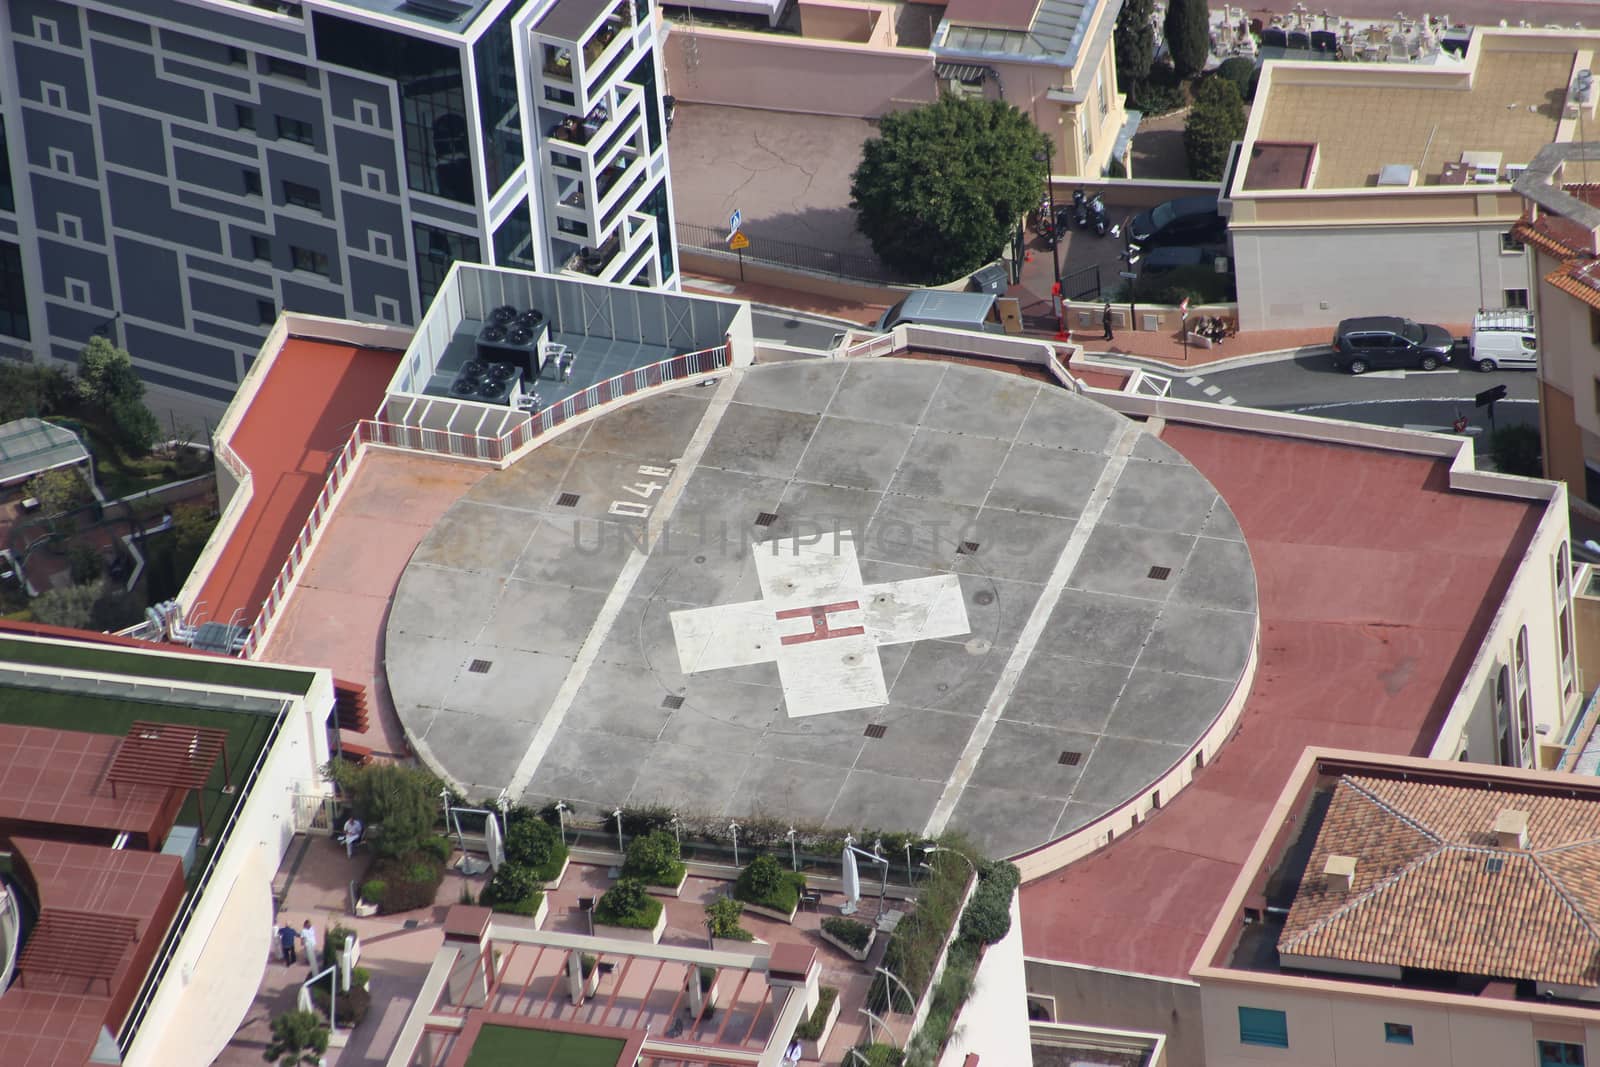 Helicopter Landing Pad on a Hospital Building in Monaco